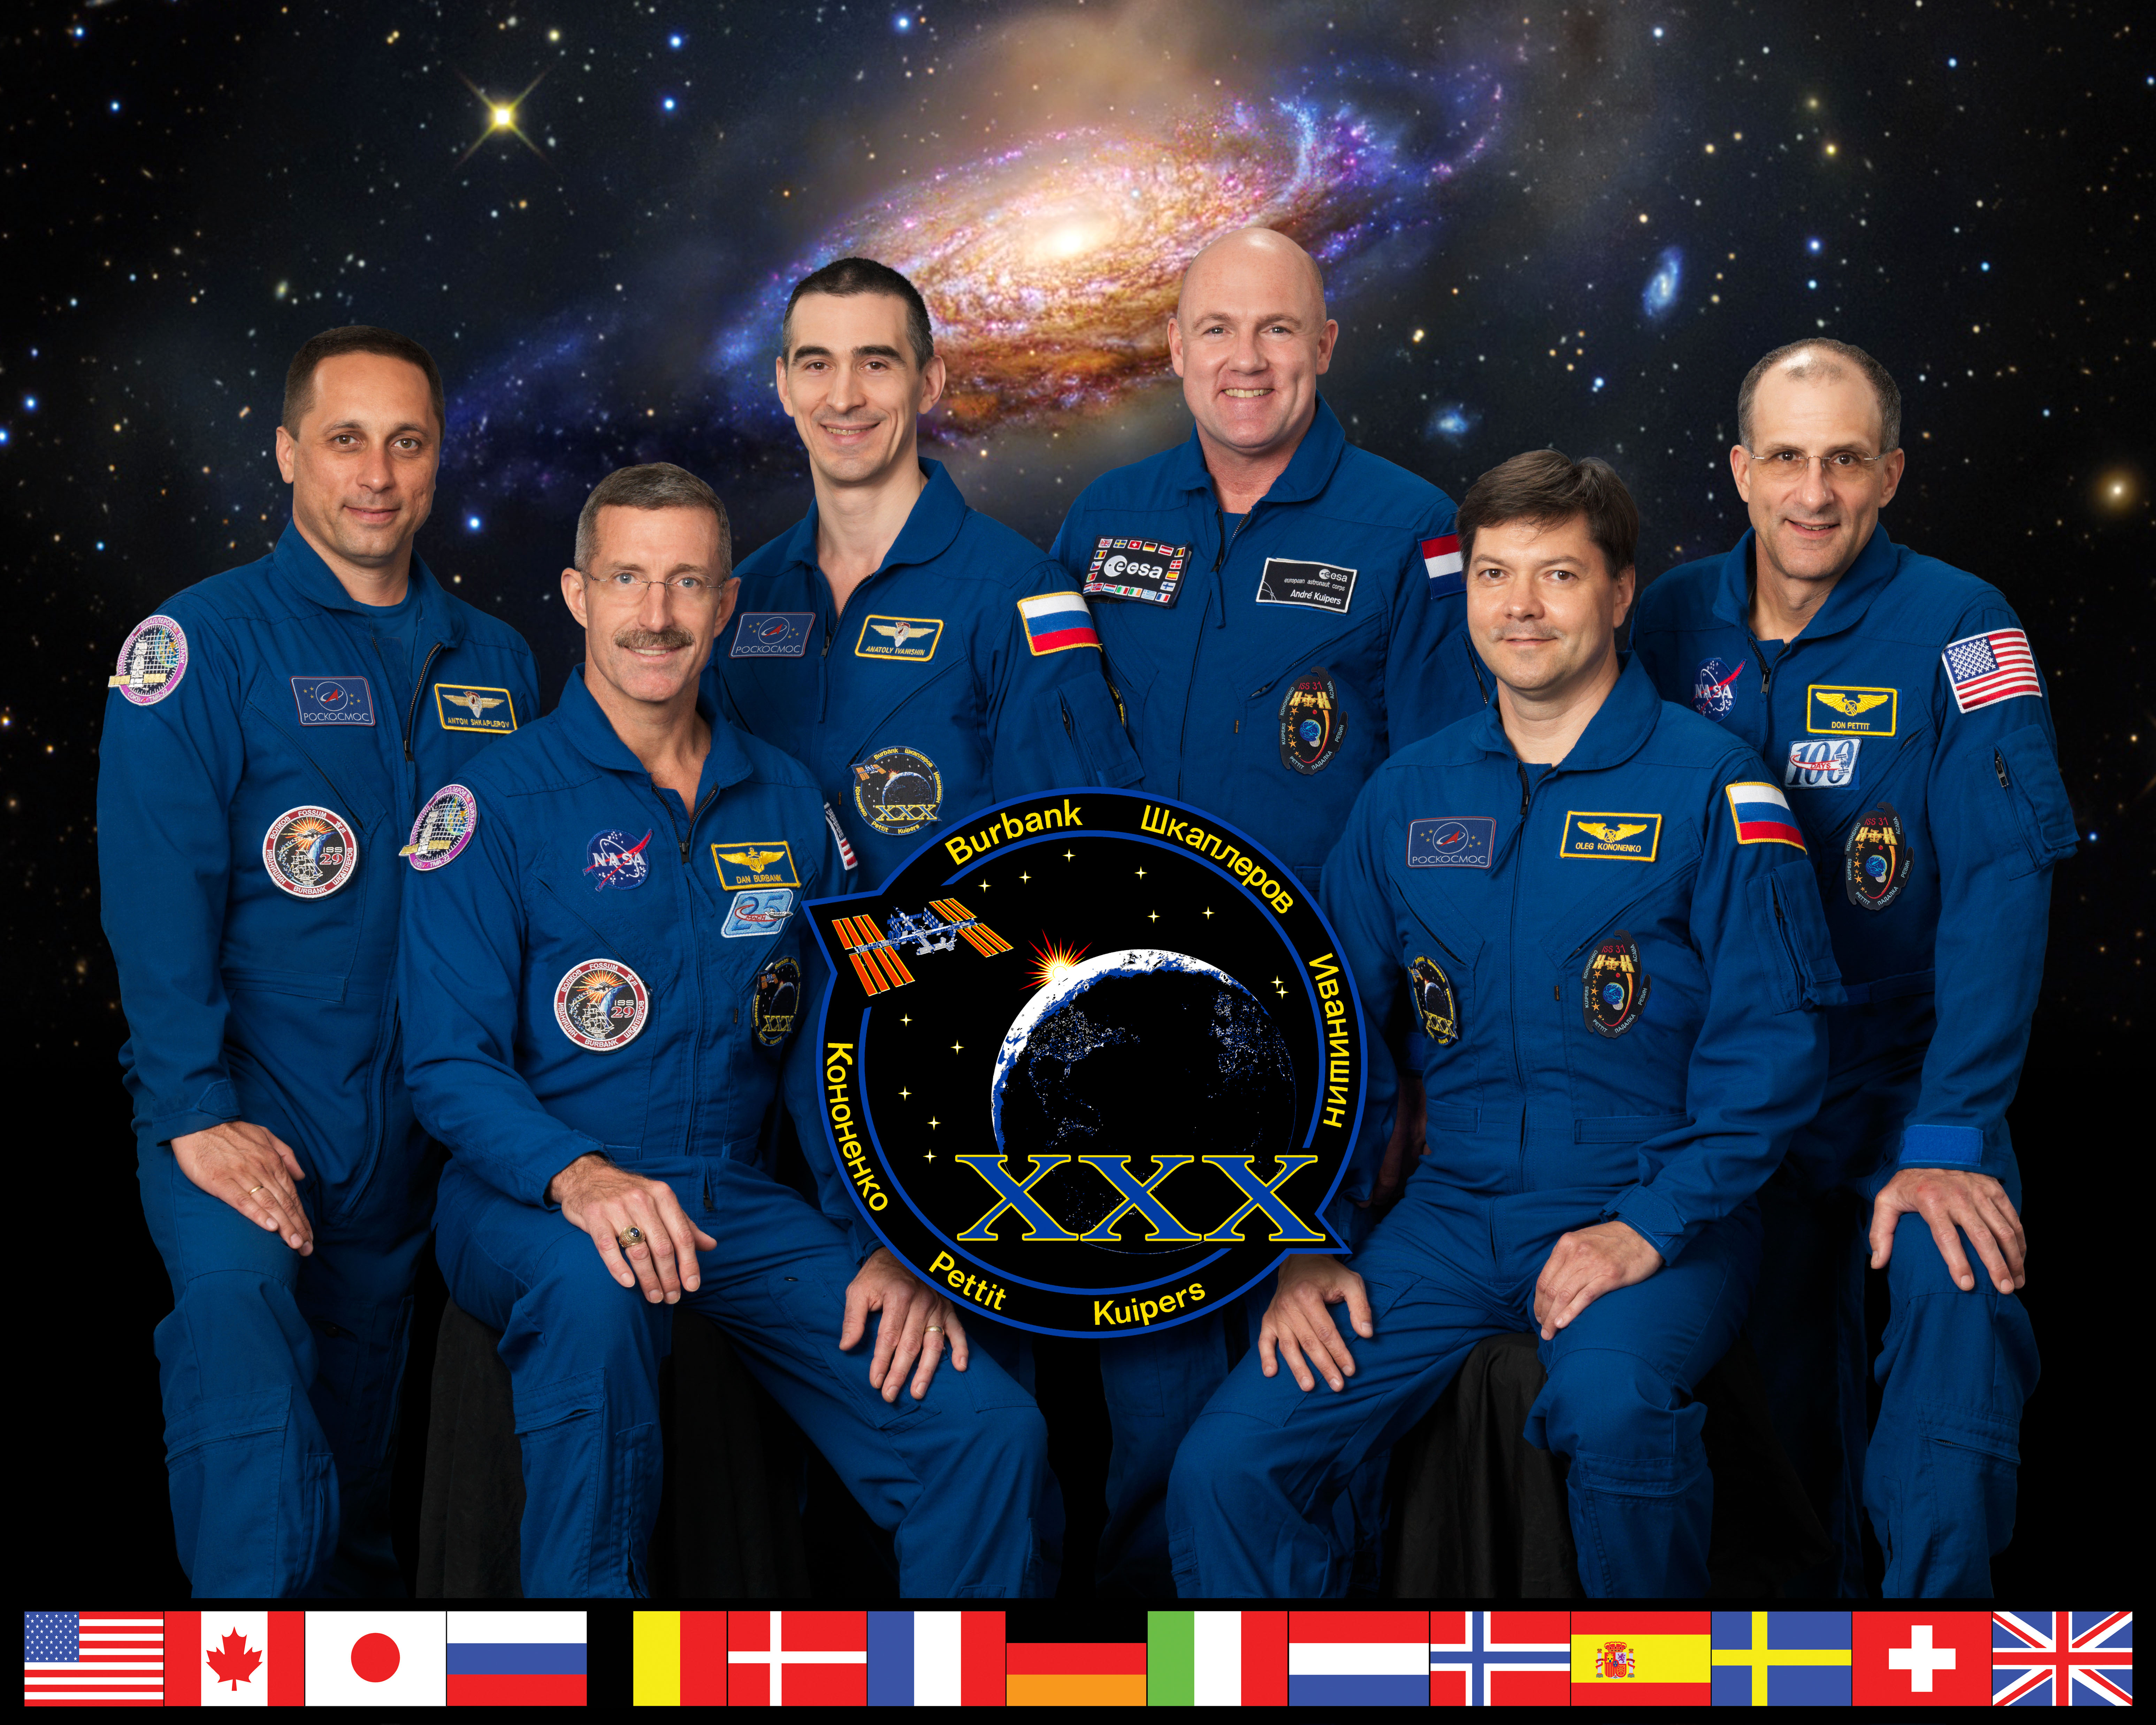 Expedition 30 Official Crew Portrait